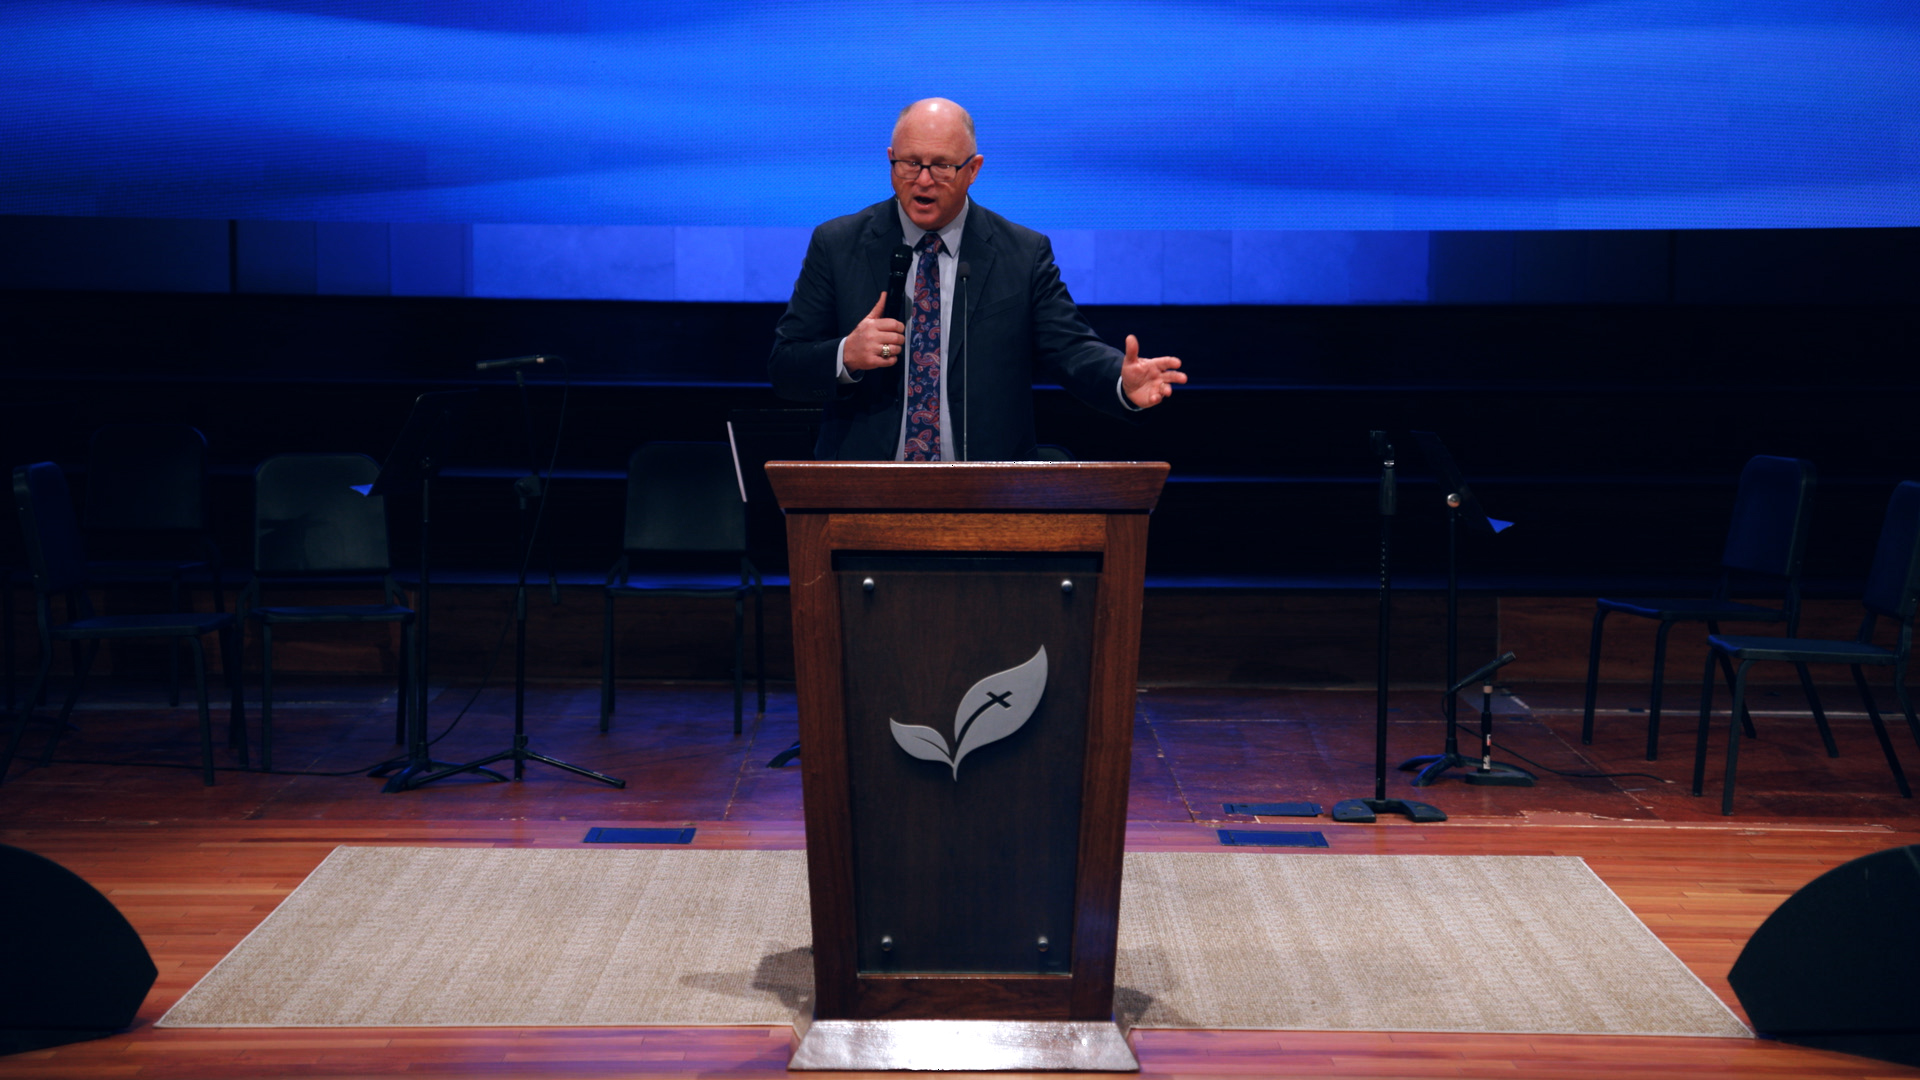 Pastor Paul Chappell: The Calling of a Minister